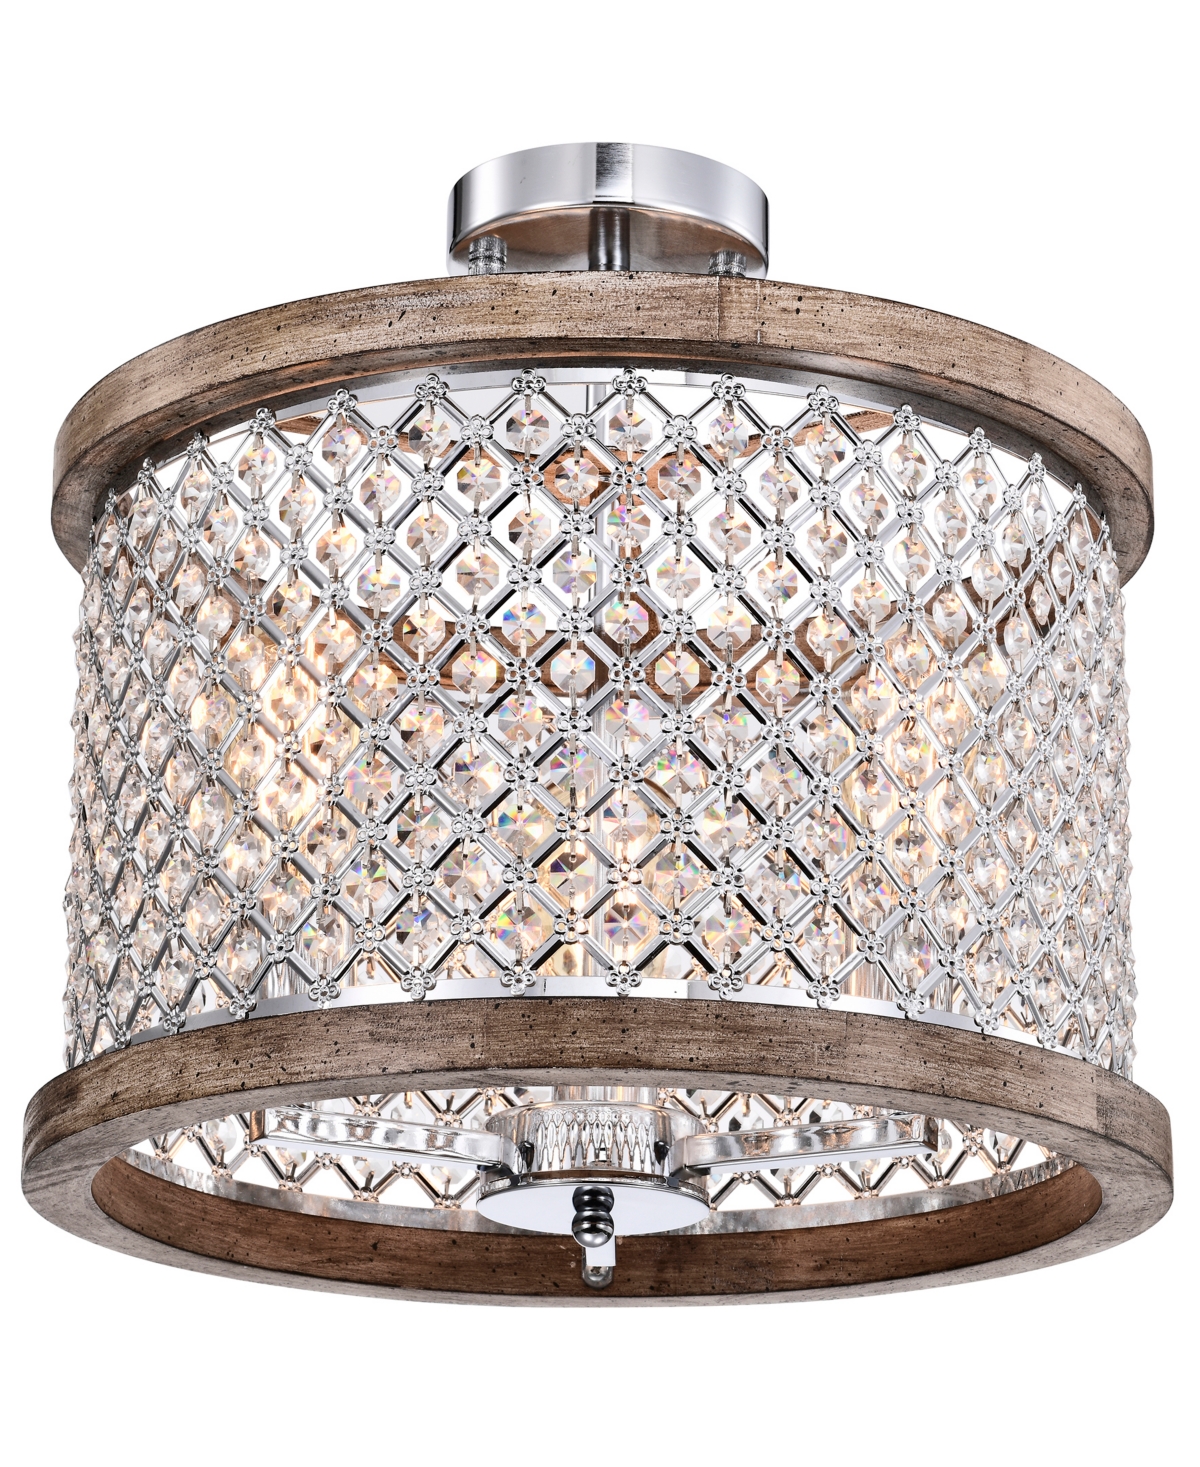 Home Accessories Amelia 16" Indoor Finish Semi-flush Mount Ceiling Light With Light Kit In Chrome And Faux Wood Grain